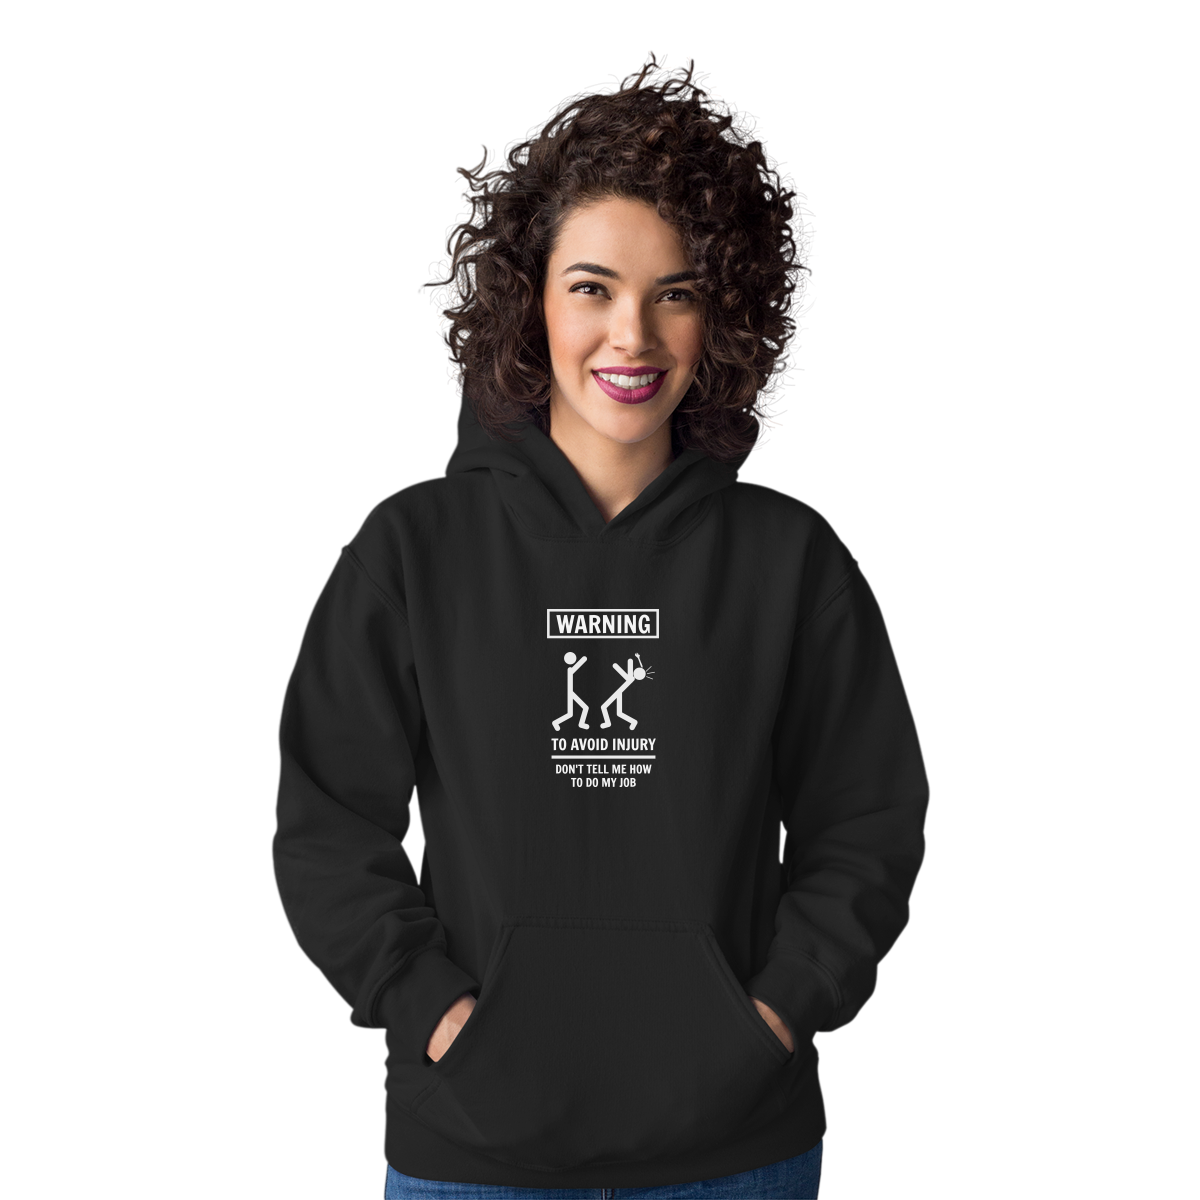 Don't Tell Me How To Do My Job Unisex Hoodie | Black